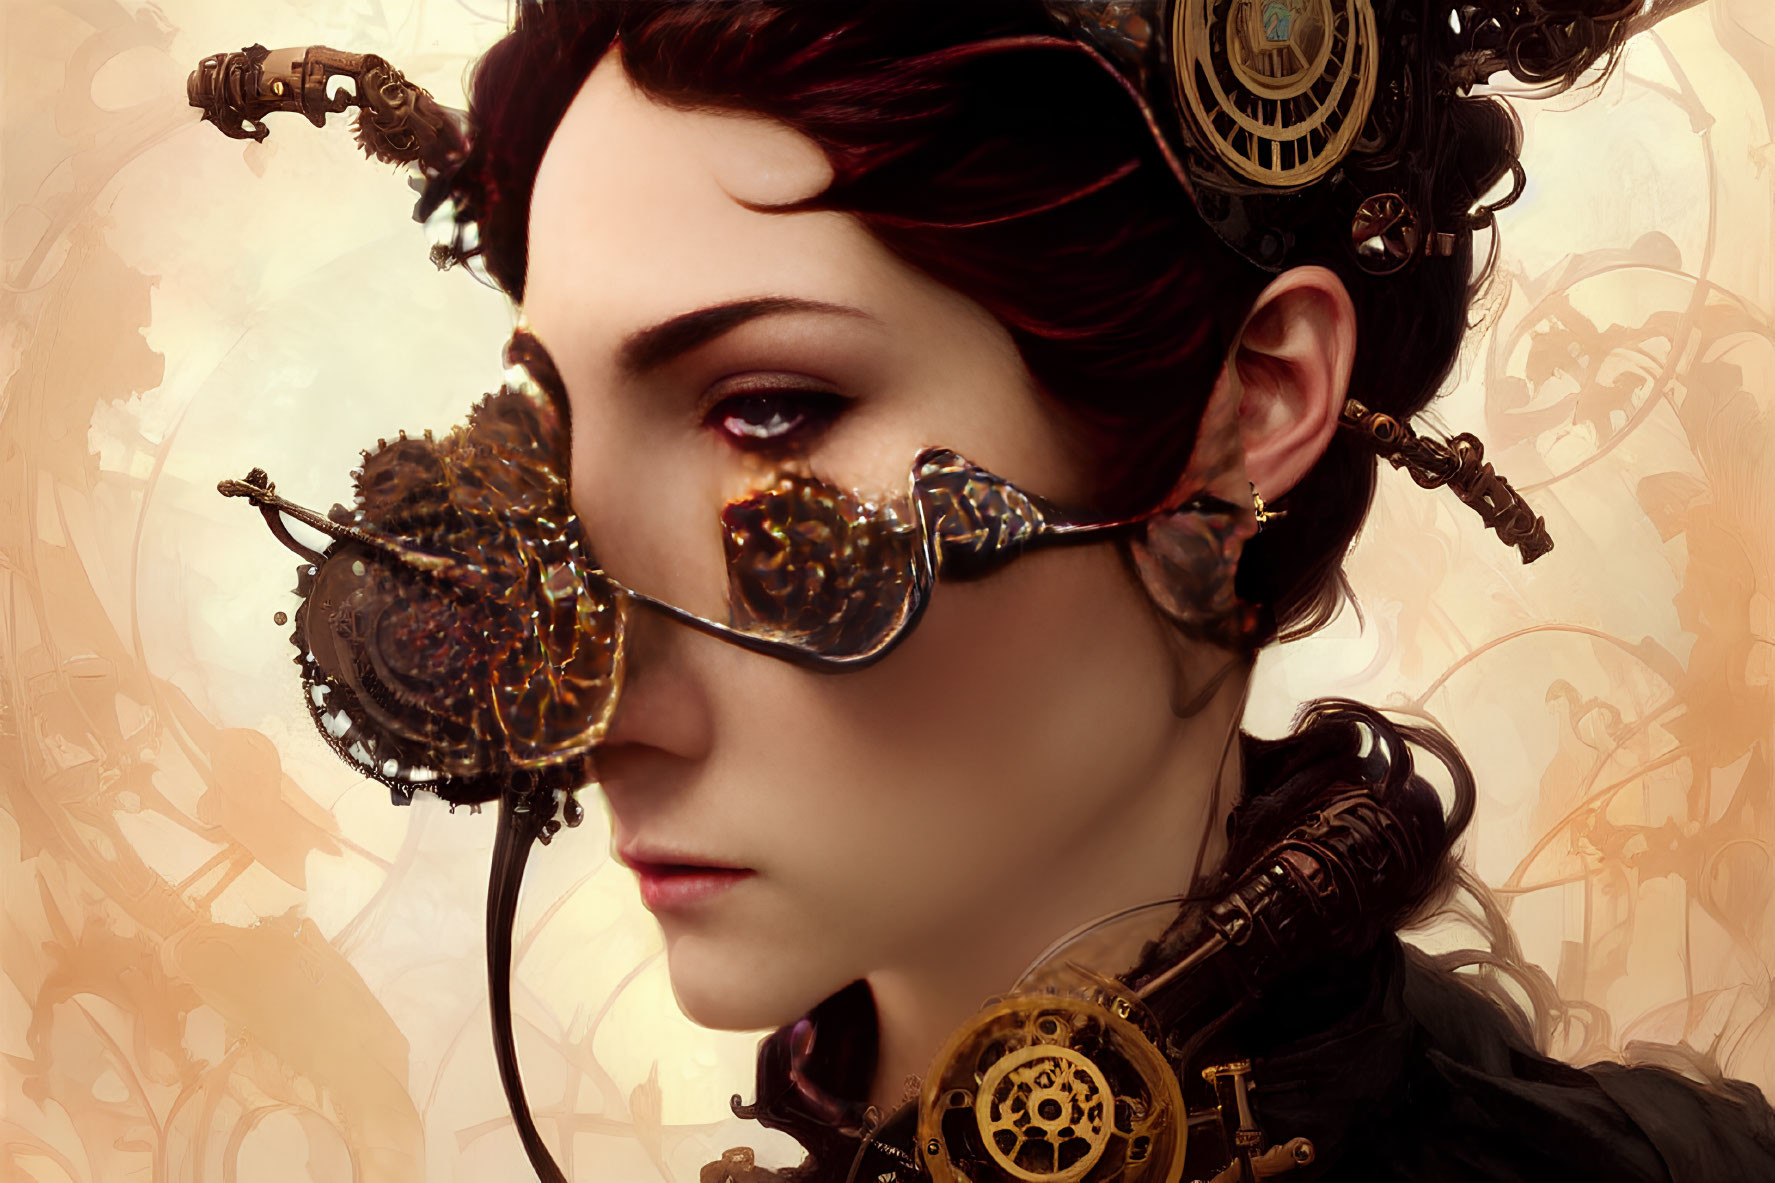 Steampunk-themed woman with mechanical goggles and gear embellishments